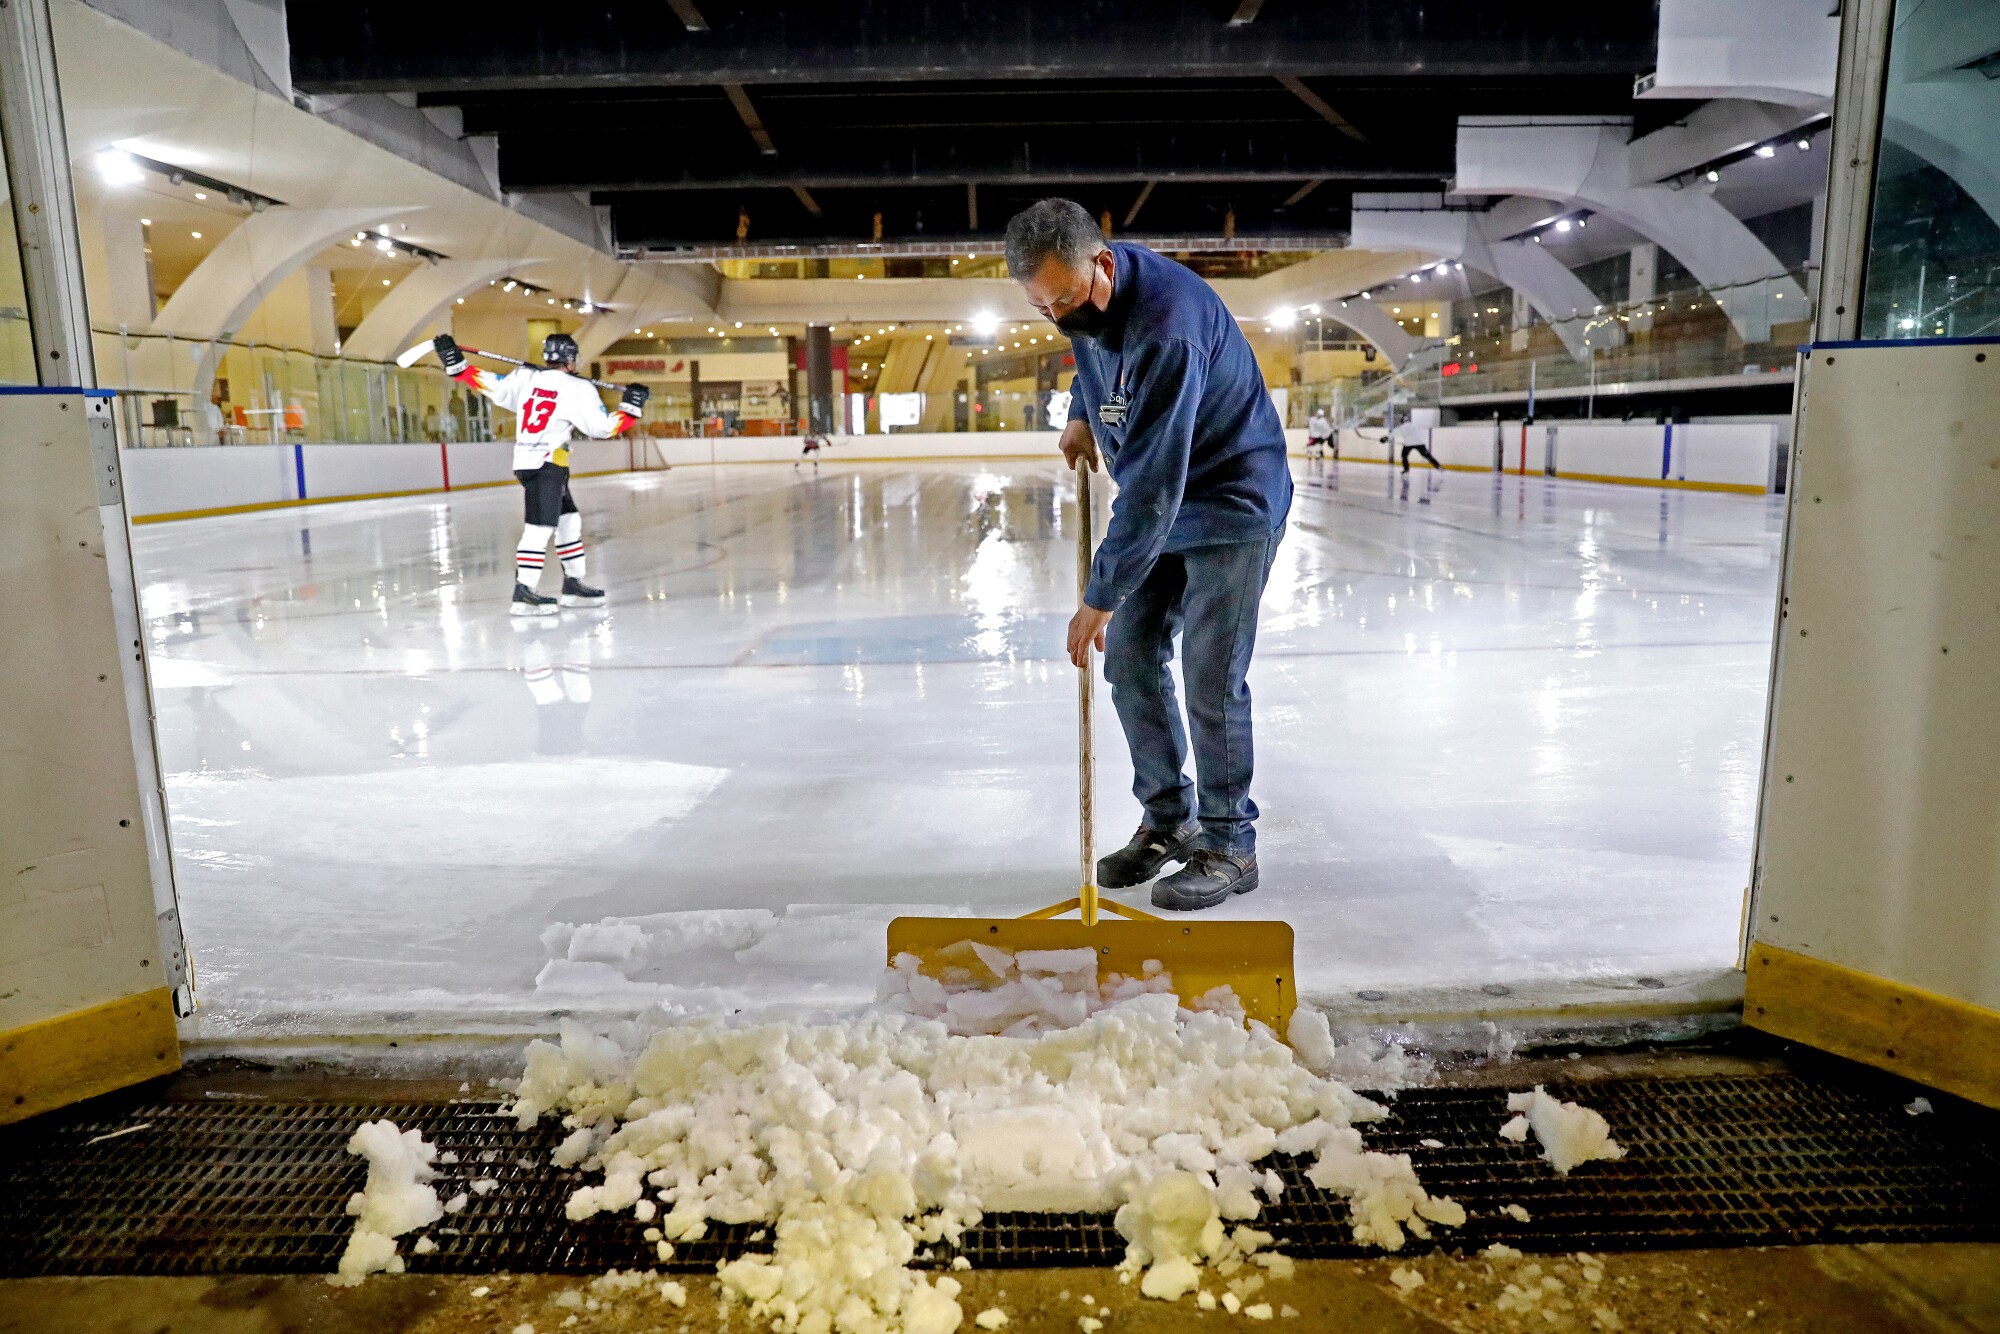  Apolinar Lopez clears off the extra ice after driving the Zamboni in preparation for a scrimmage.